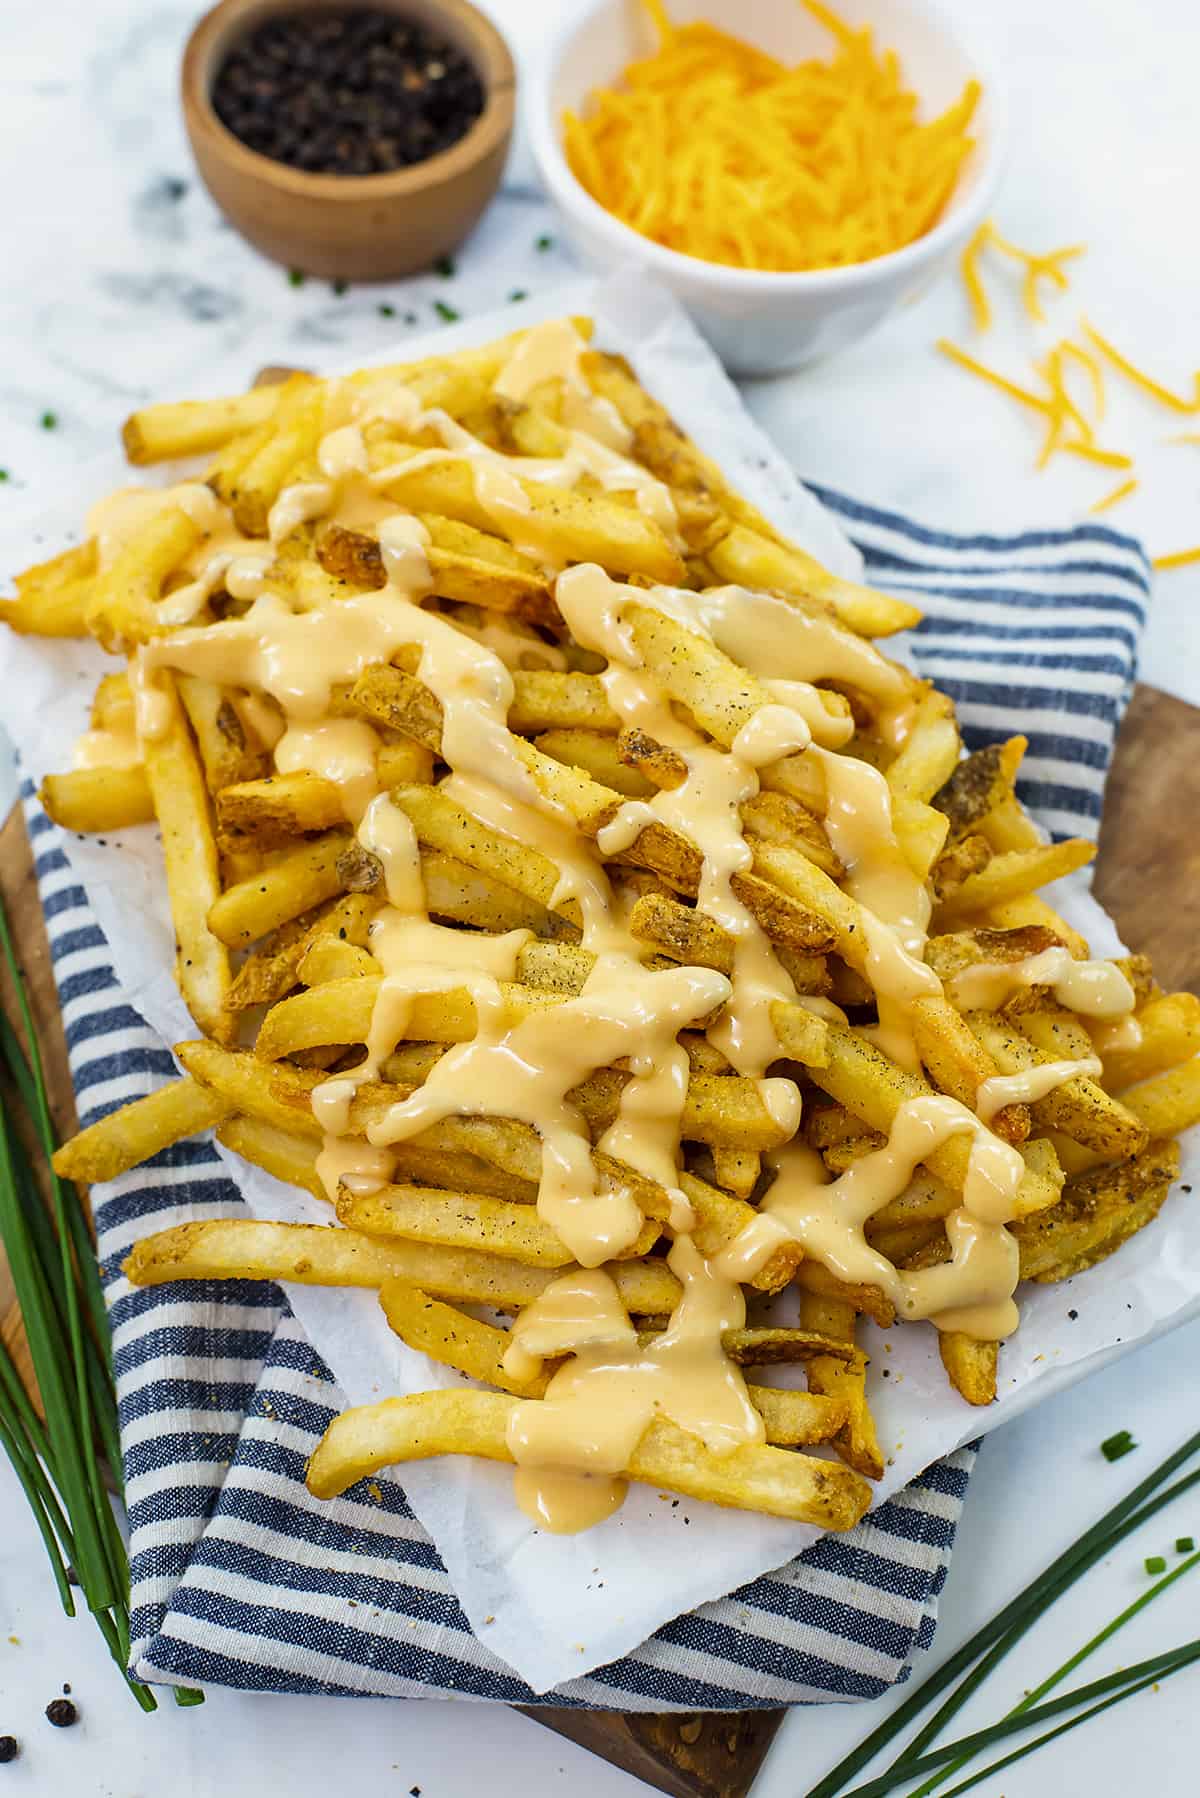 French fries drizzled with cheese sauce.